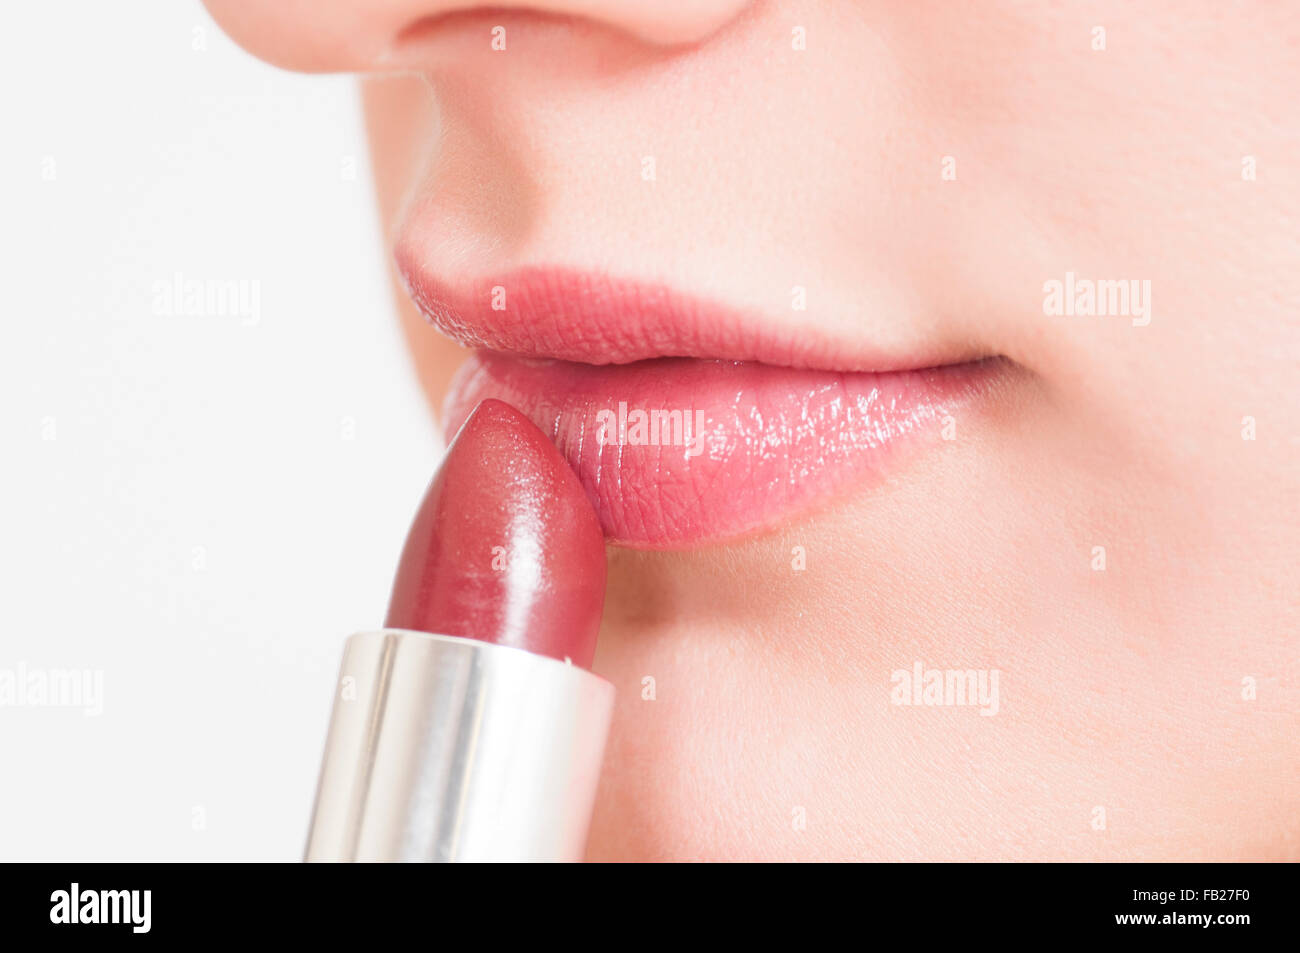 Close up of a young woman applying make up lipstick Stock Photo